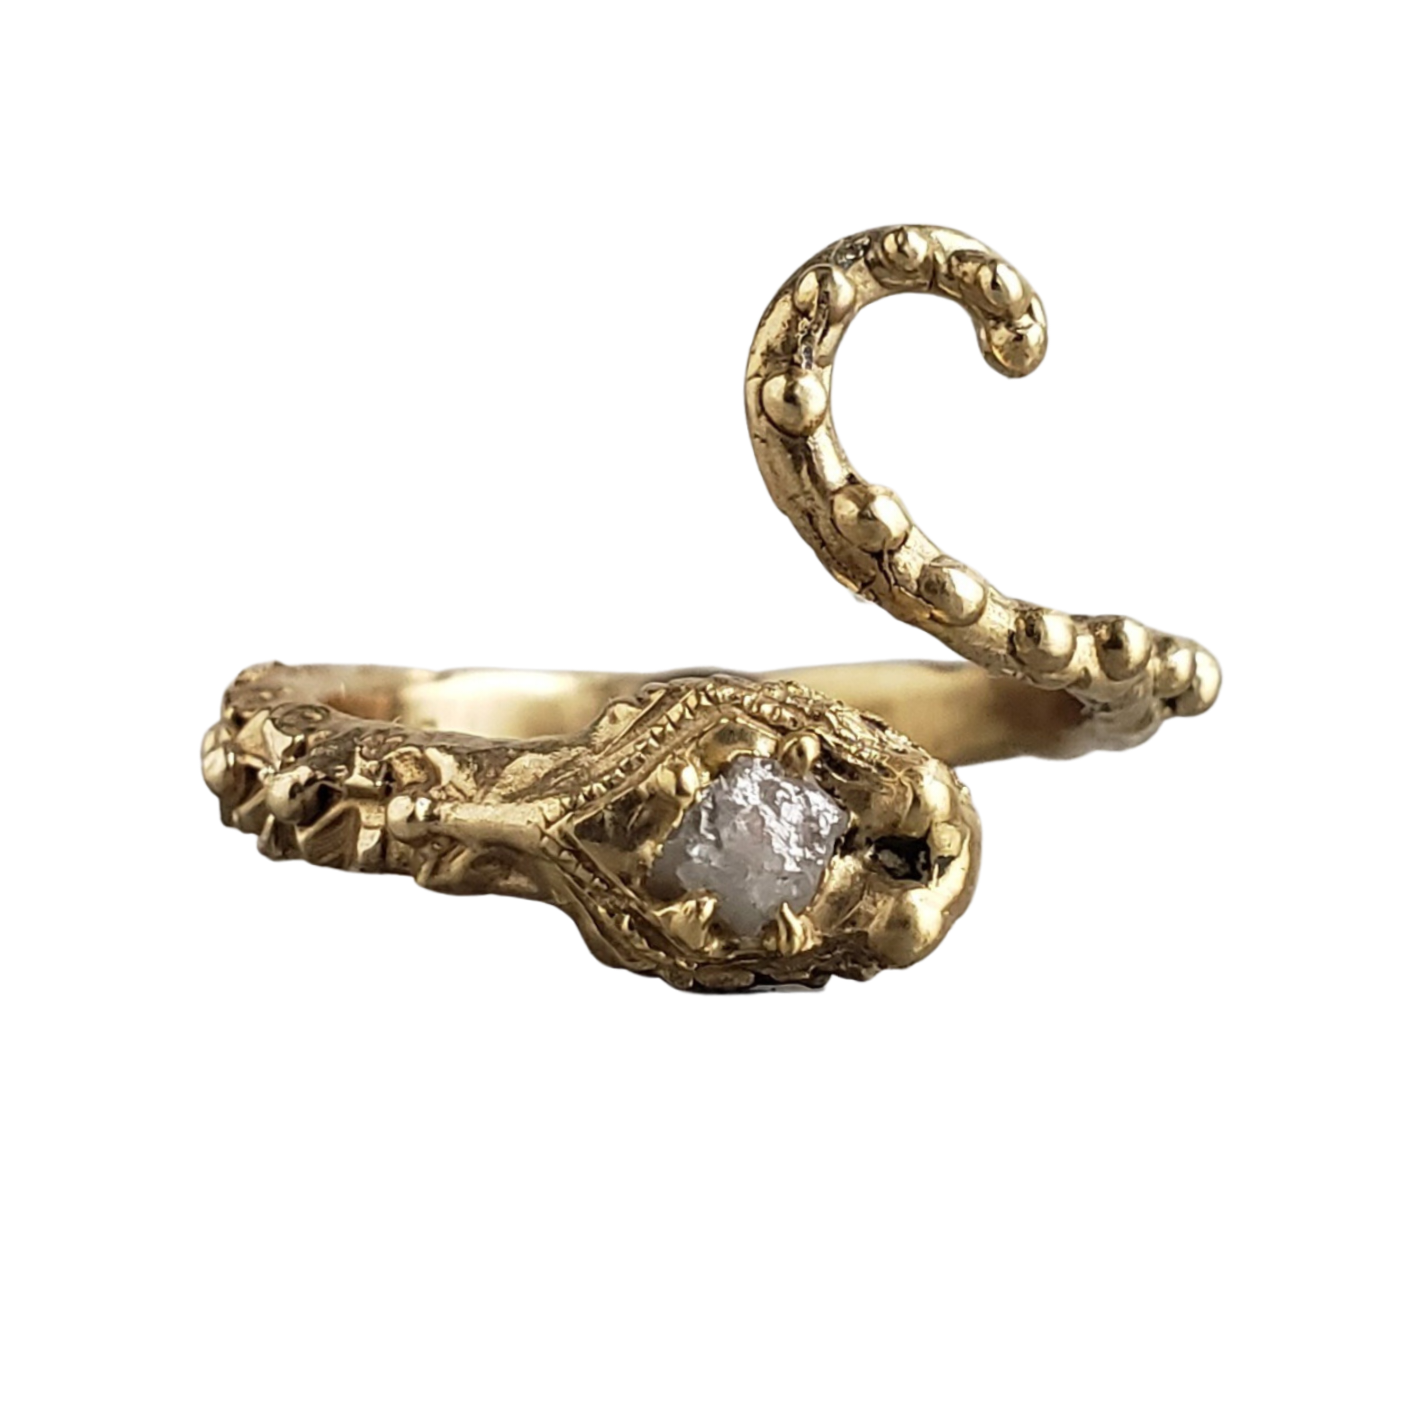 Octopus Snake Ring, Rough Diamond and Bronze